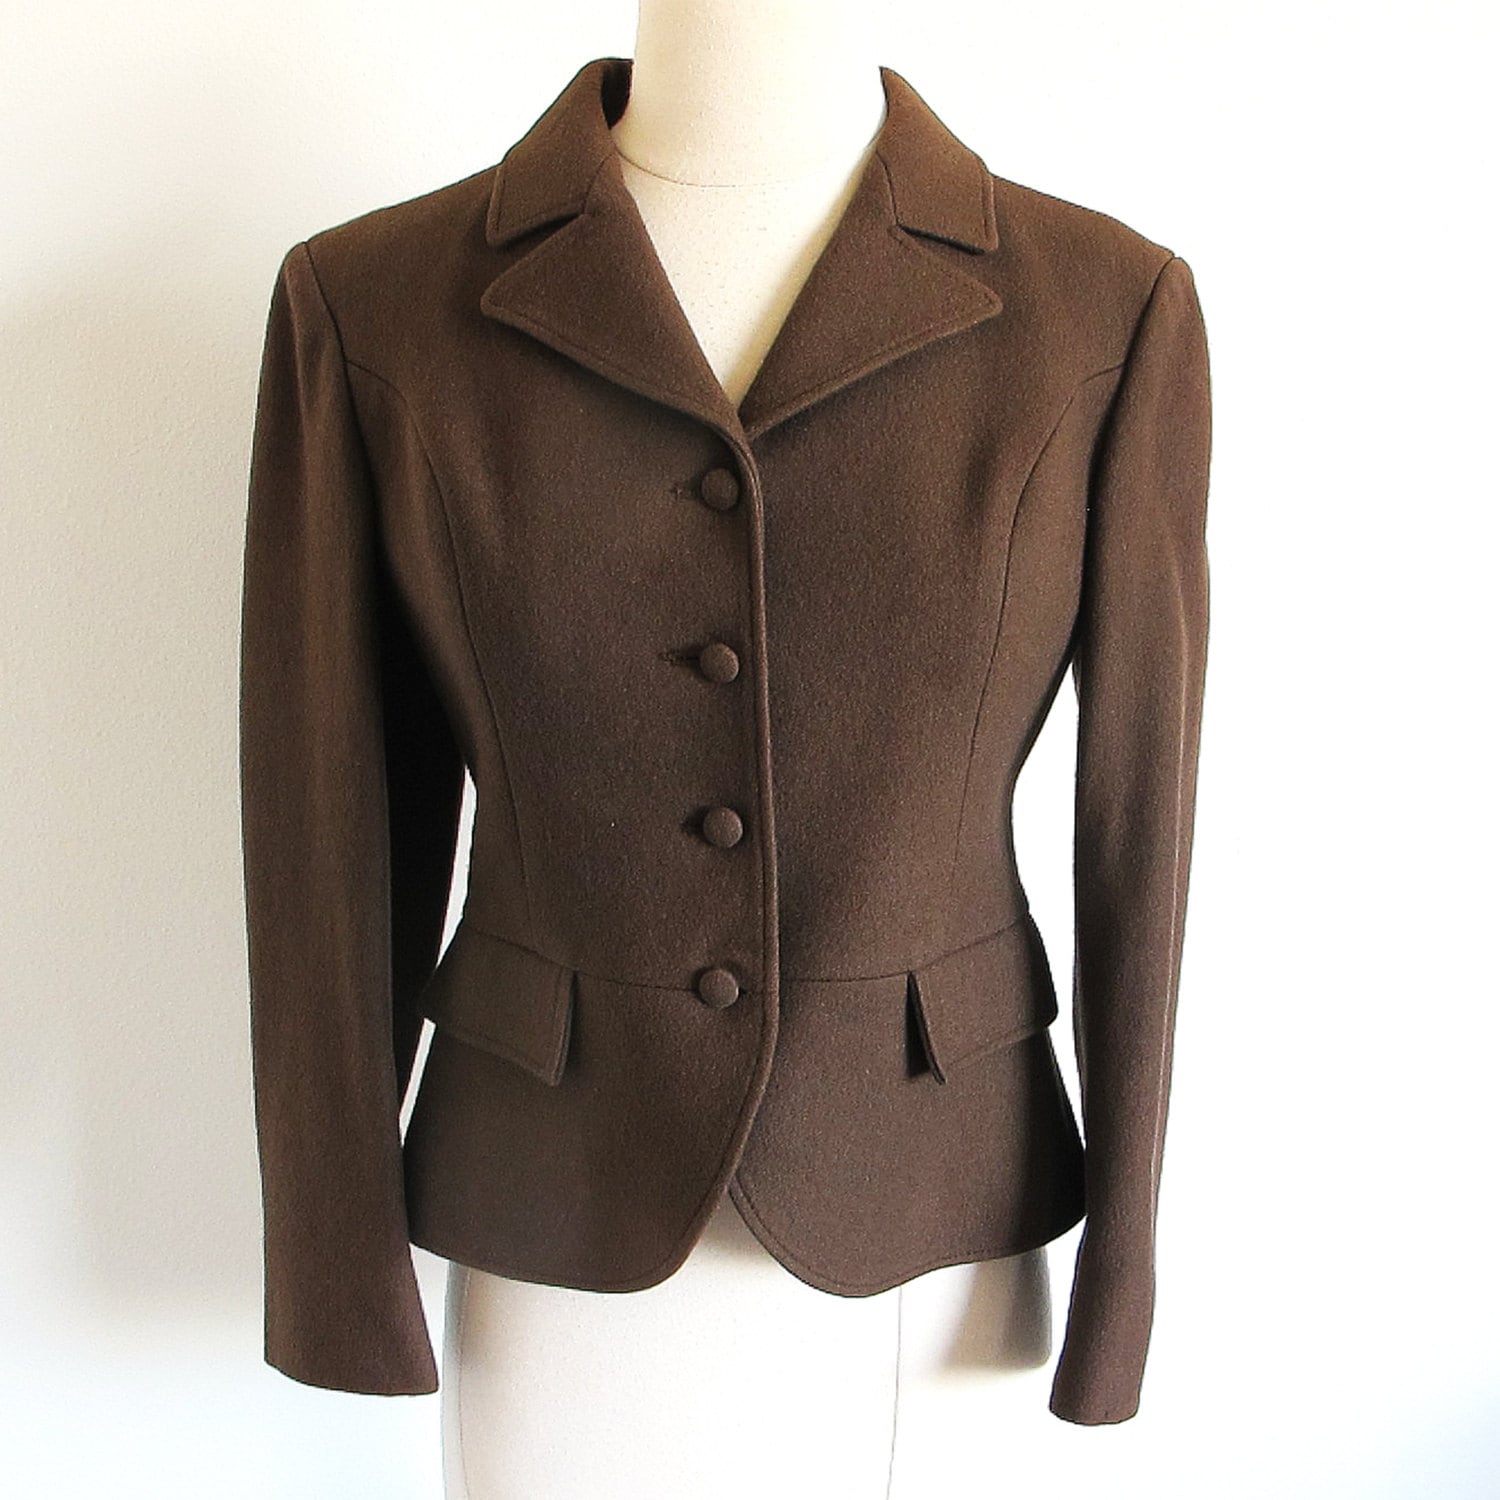 Vintage 50s Wool Jacket Small Tailored Brown by StraylightVintage